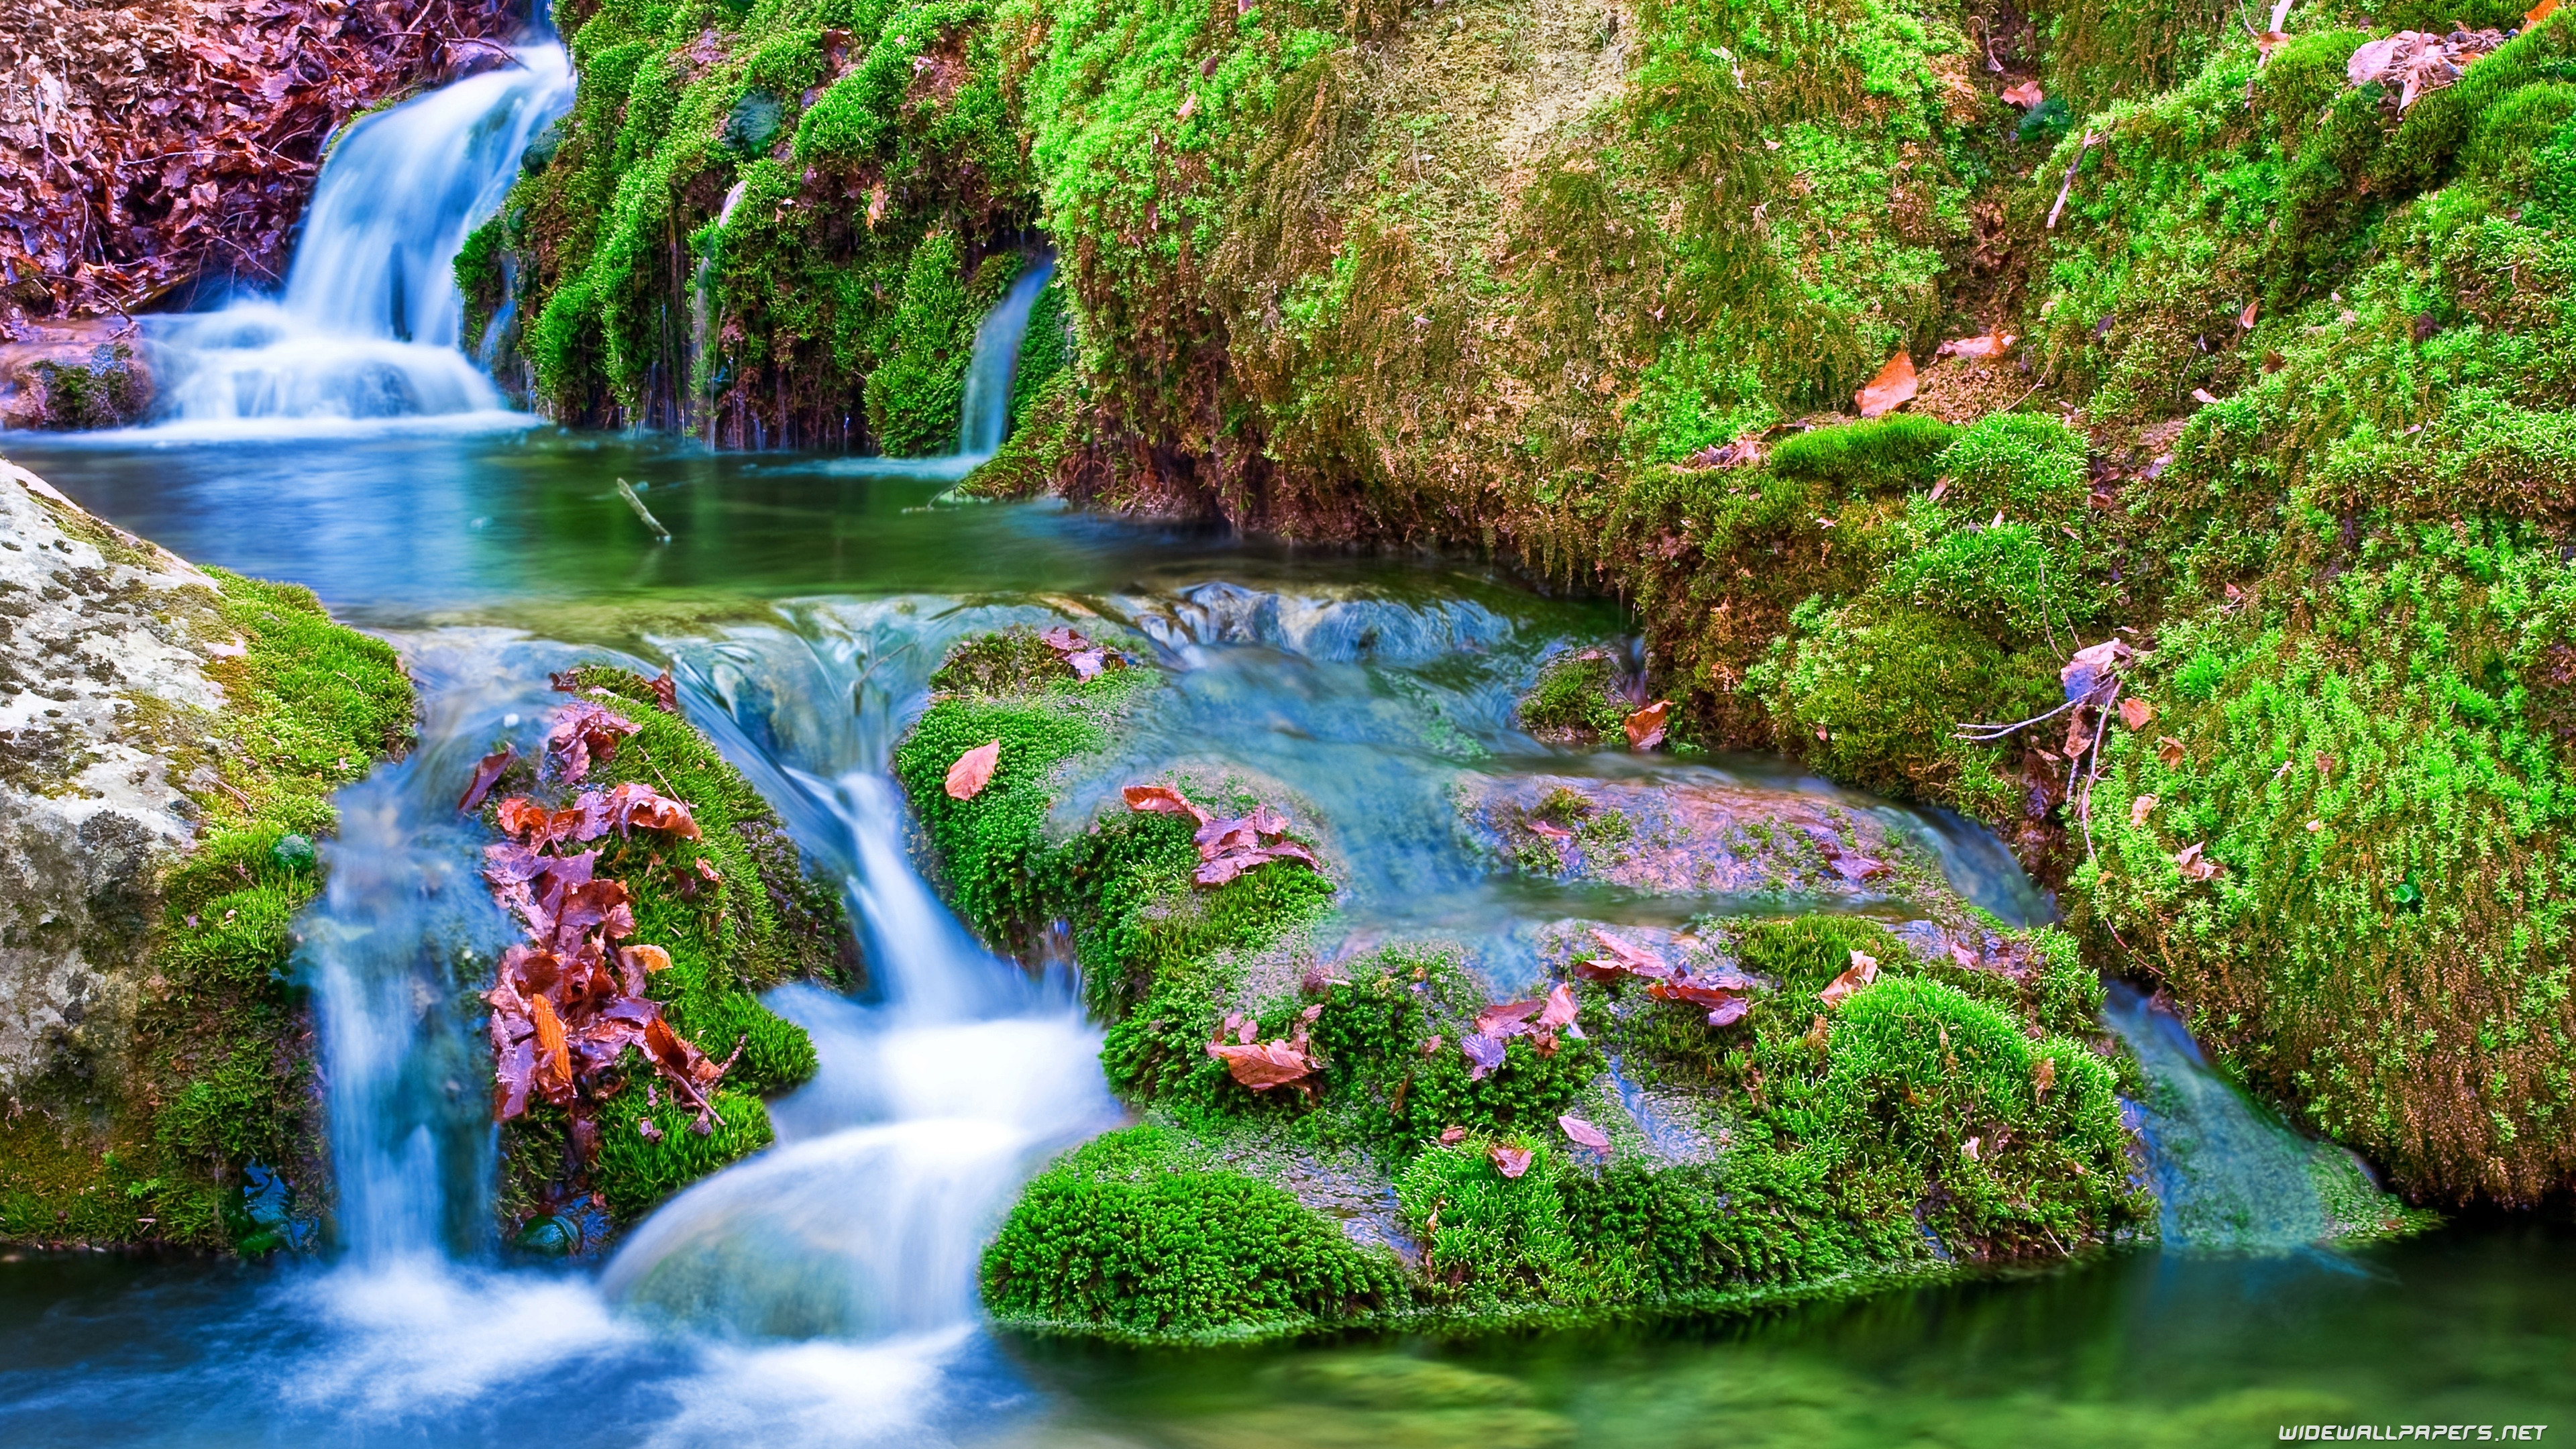 3840x2160 Waterfall images Gallery| Beautiful and Interesting Images,Vectors,Coloring,Cliparts  |Free Hd wallpapers